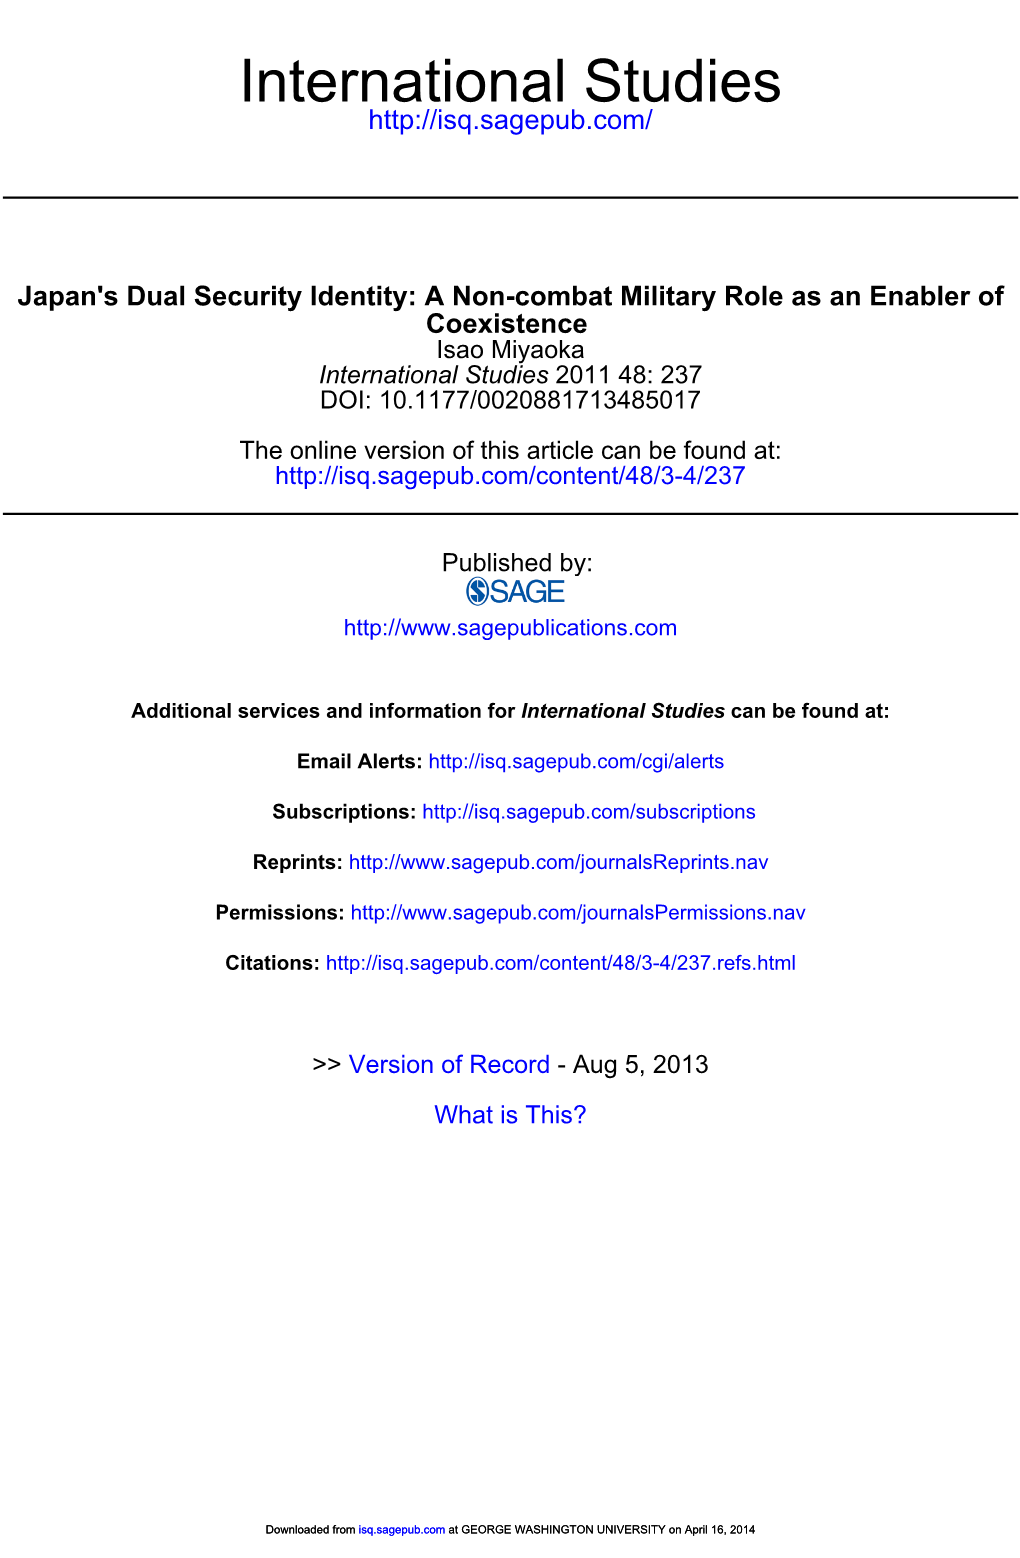 Japan's Dual Security Identity: a Non-Combat Military Role As an Enabler of Coexistence Isao Miyaoka International Studies 2011 48: 237 DOI: 10.1177/0020881713485017